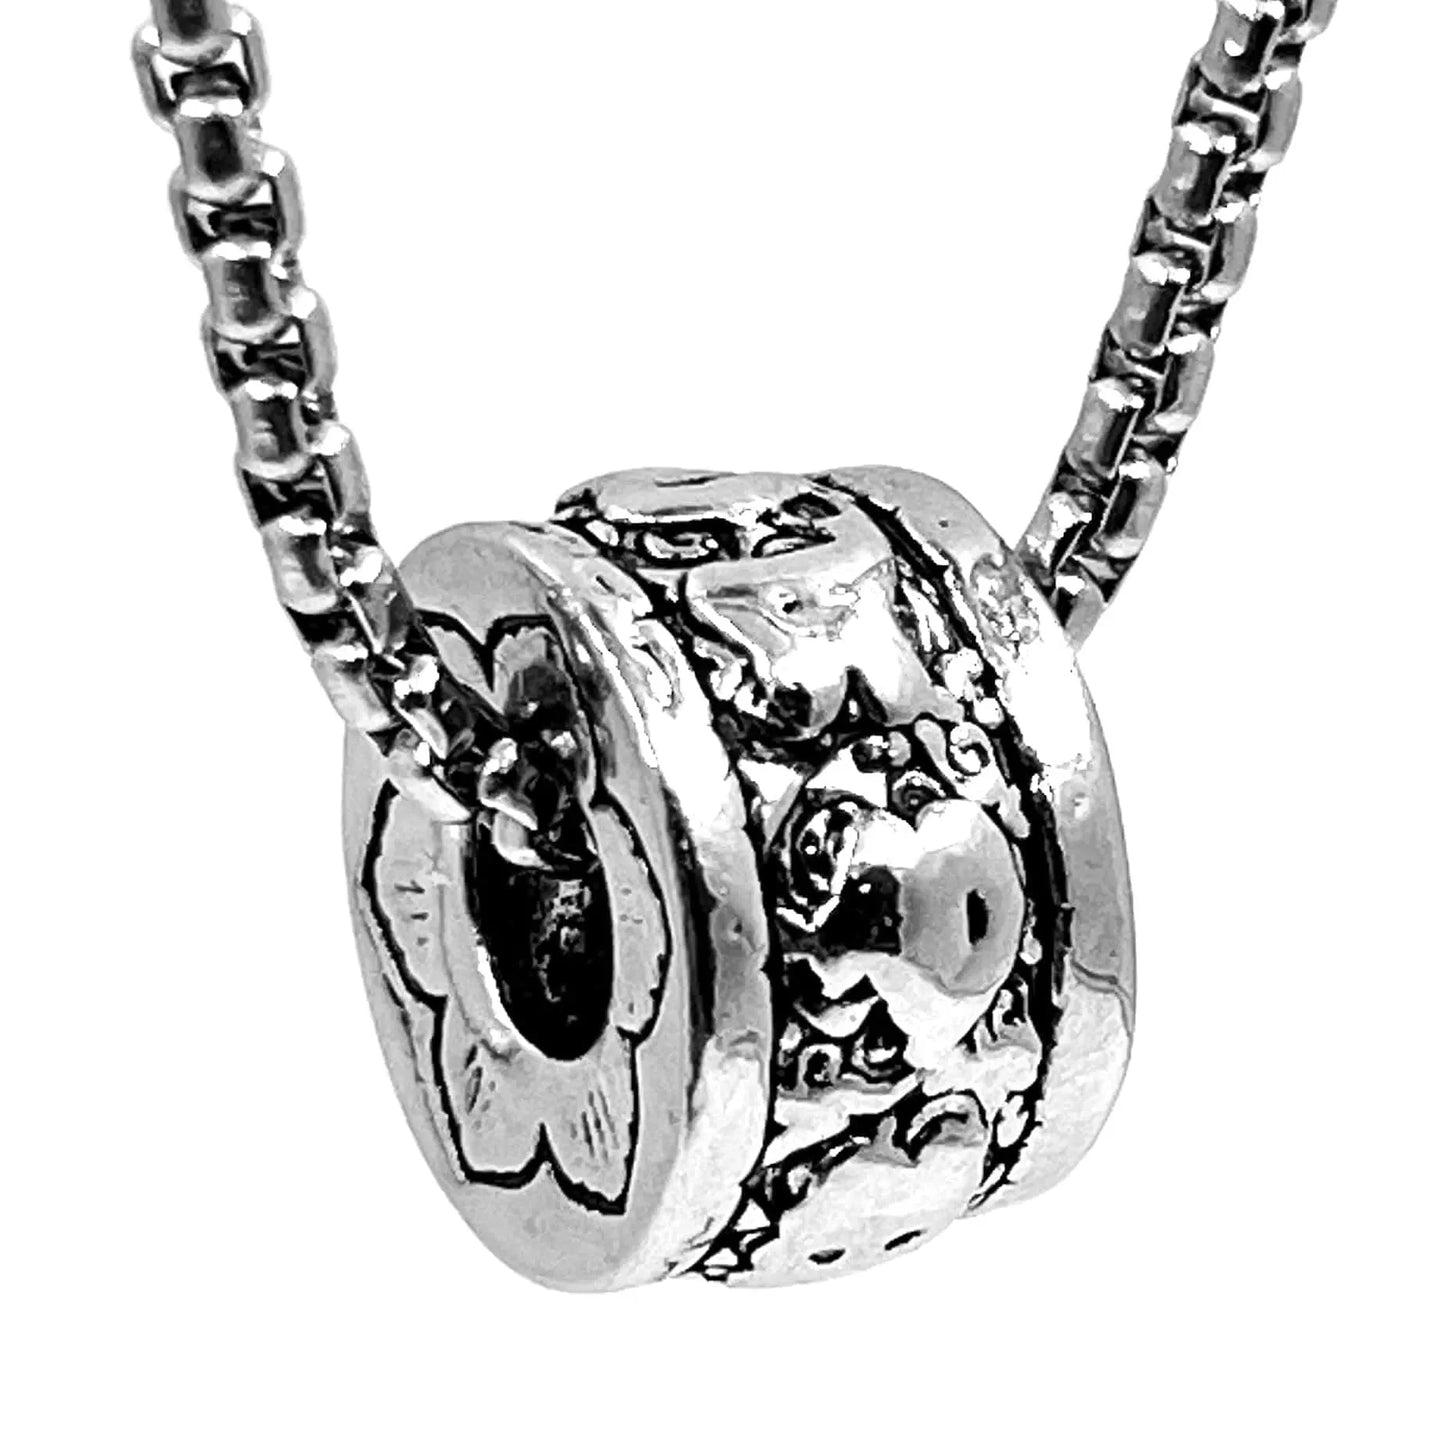 THE MEN THING Alloy Round Mantra Pendant with Pure Stainless Steel 24inch Chain for Men, Milan trending Style - Round Box Chain & Pendant for Men & Boy